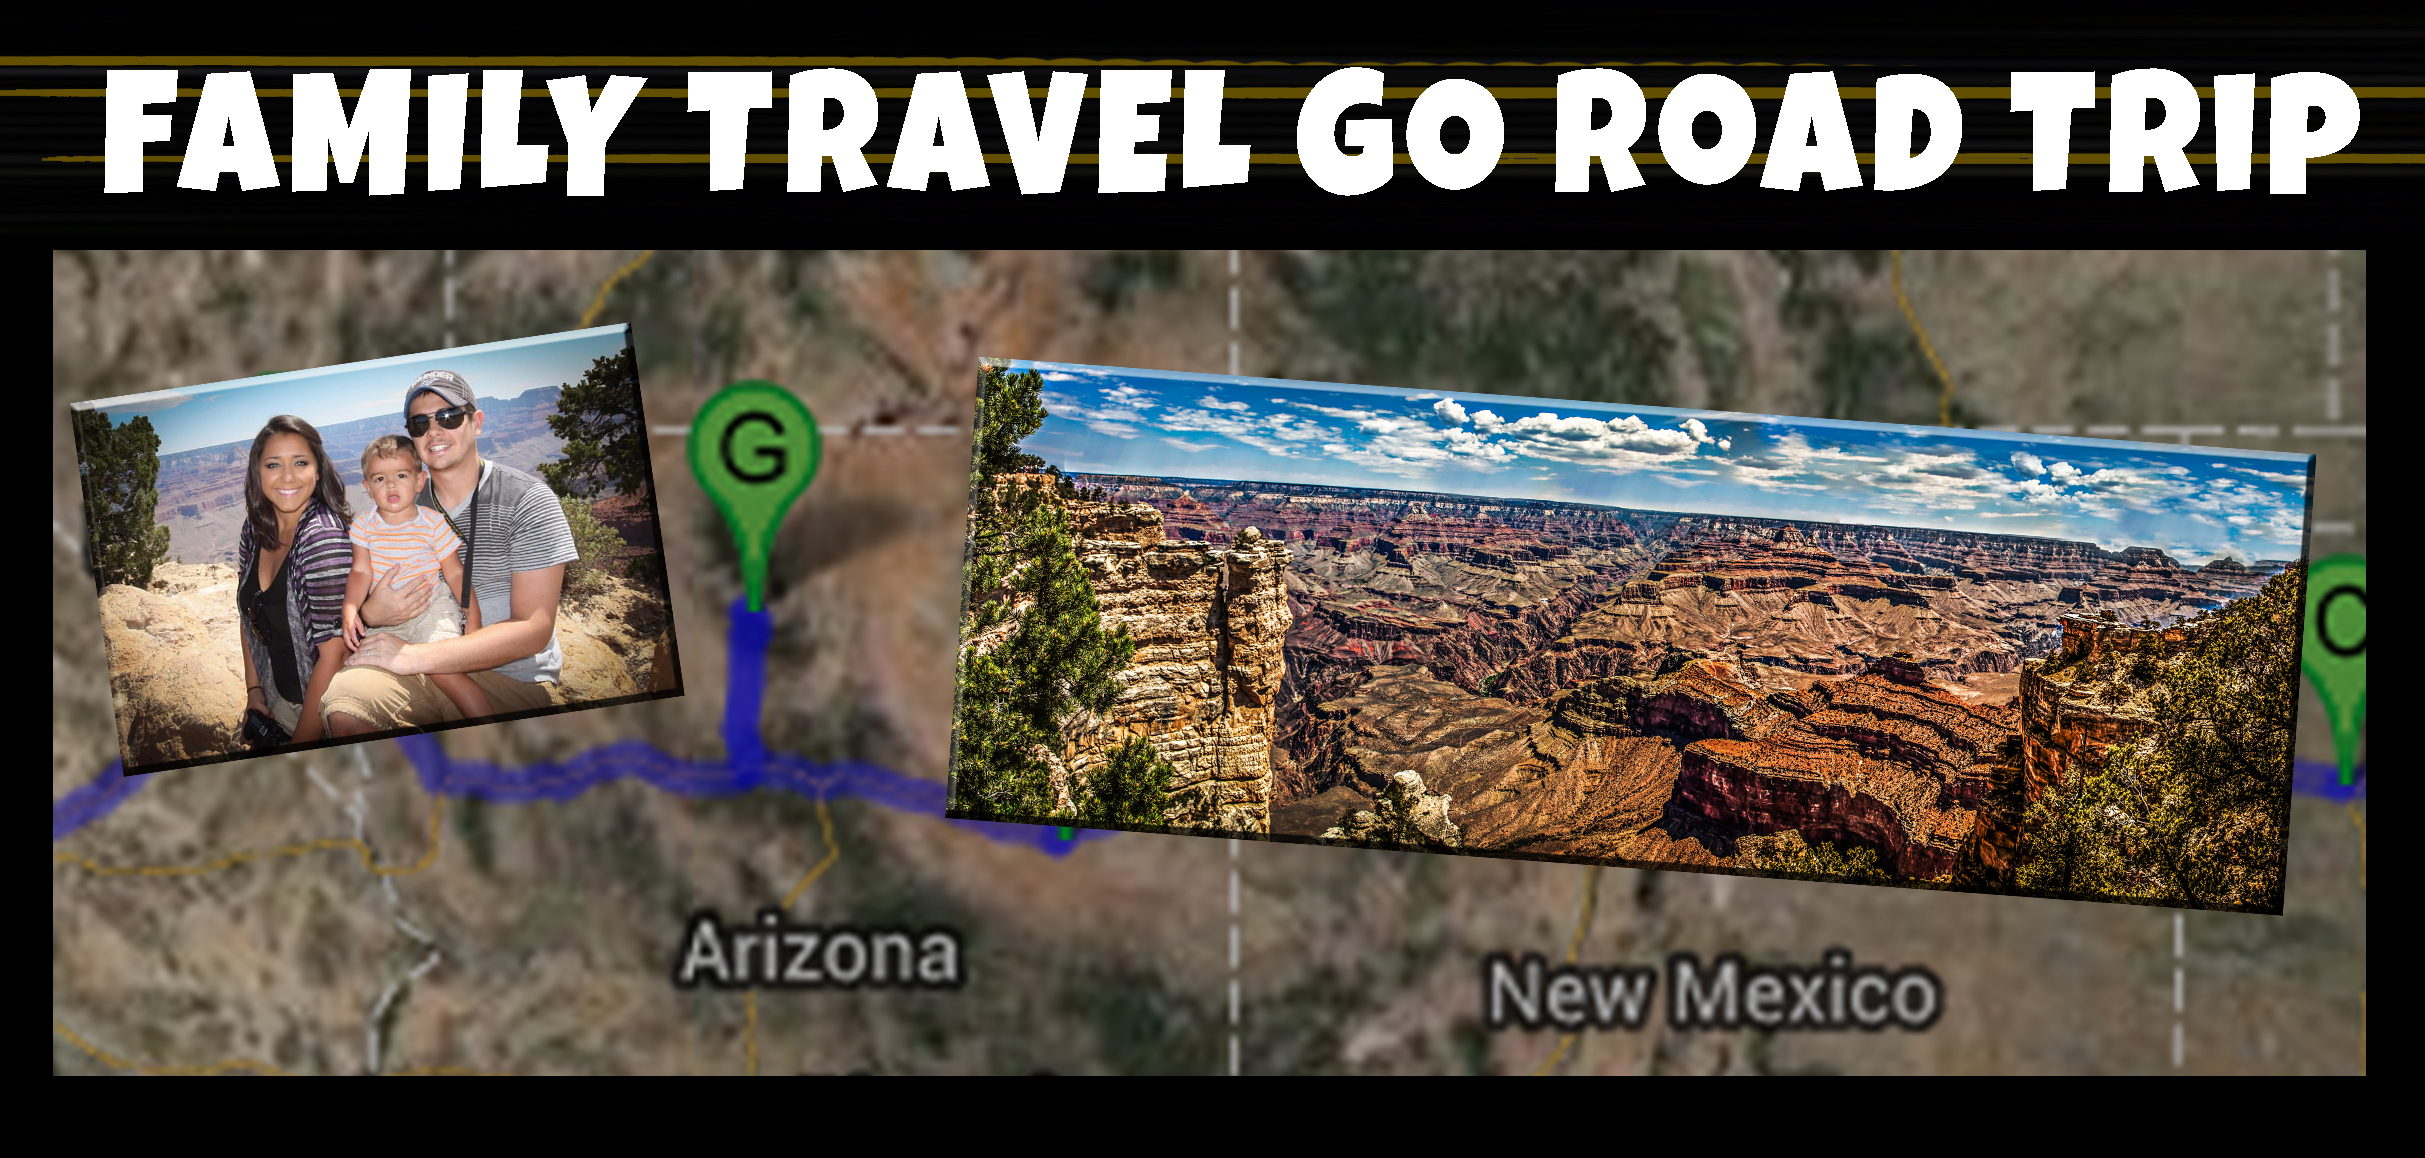 Part 2 of the West Route 66 Road Trip